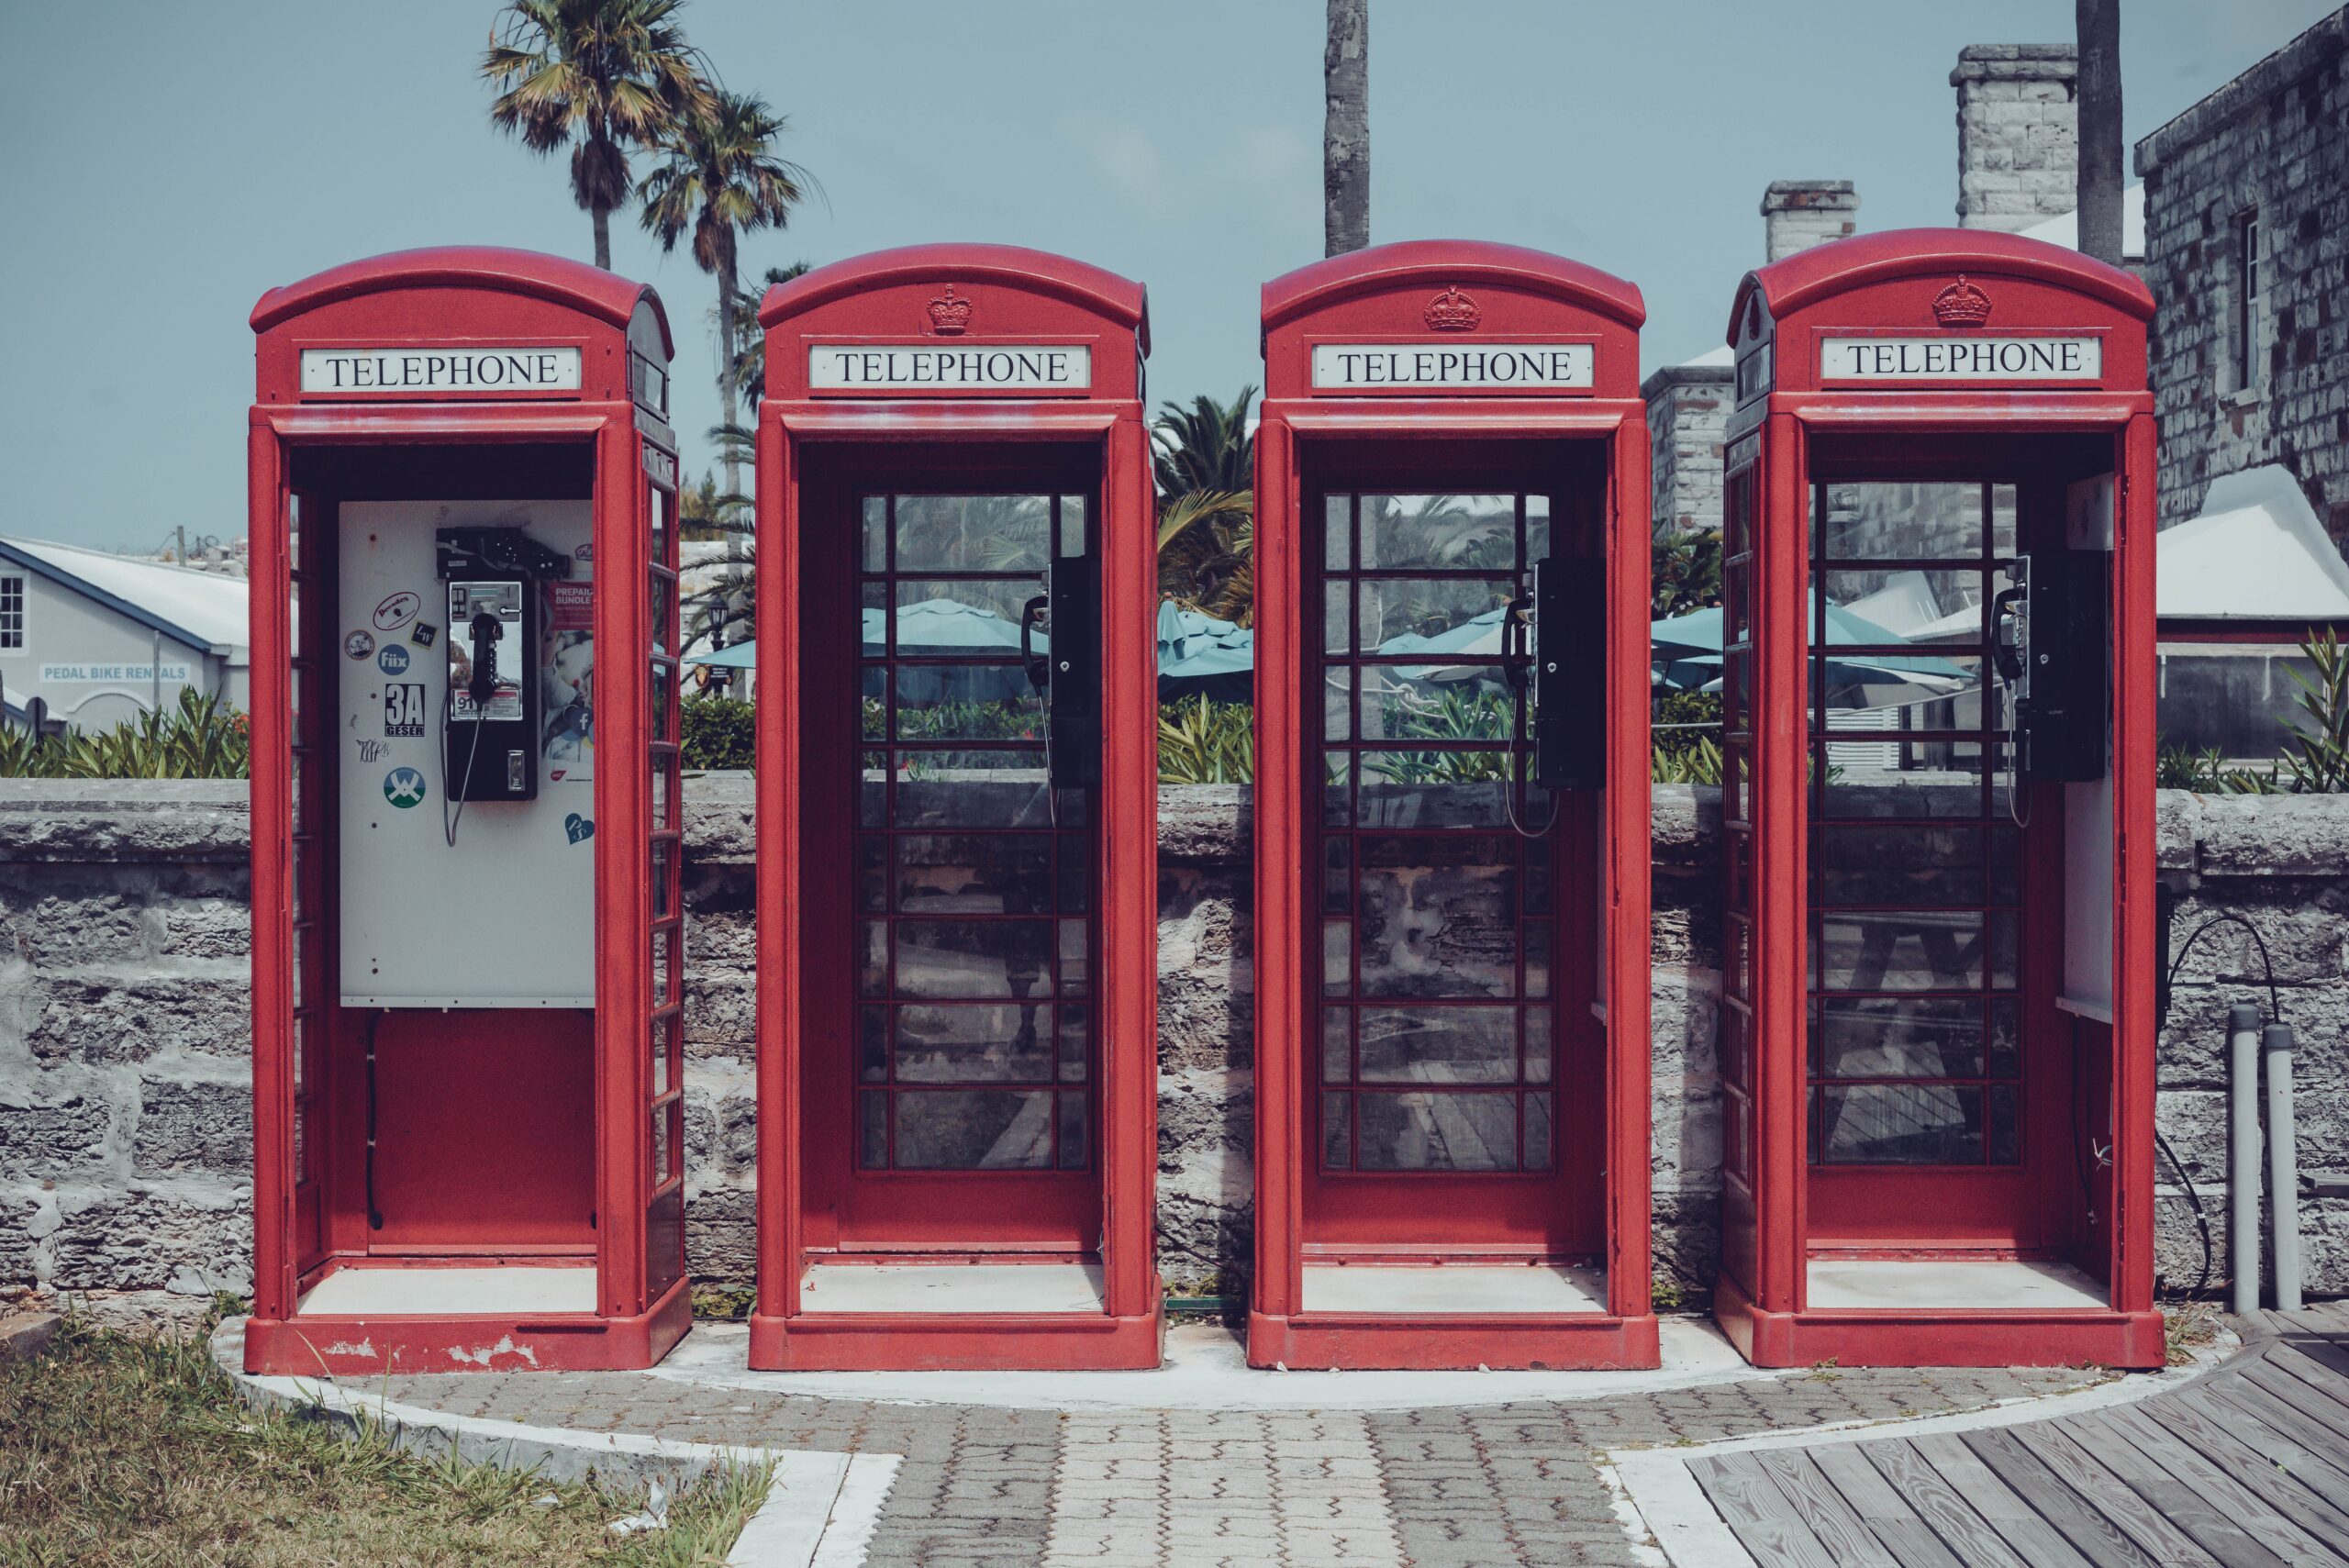 Bermuda is a unique destination with interesting cultural influence that is quite safe for visitors. 
pictured: British styled phone booths in Bermuda 